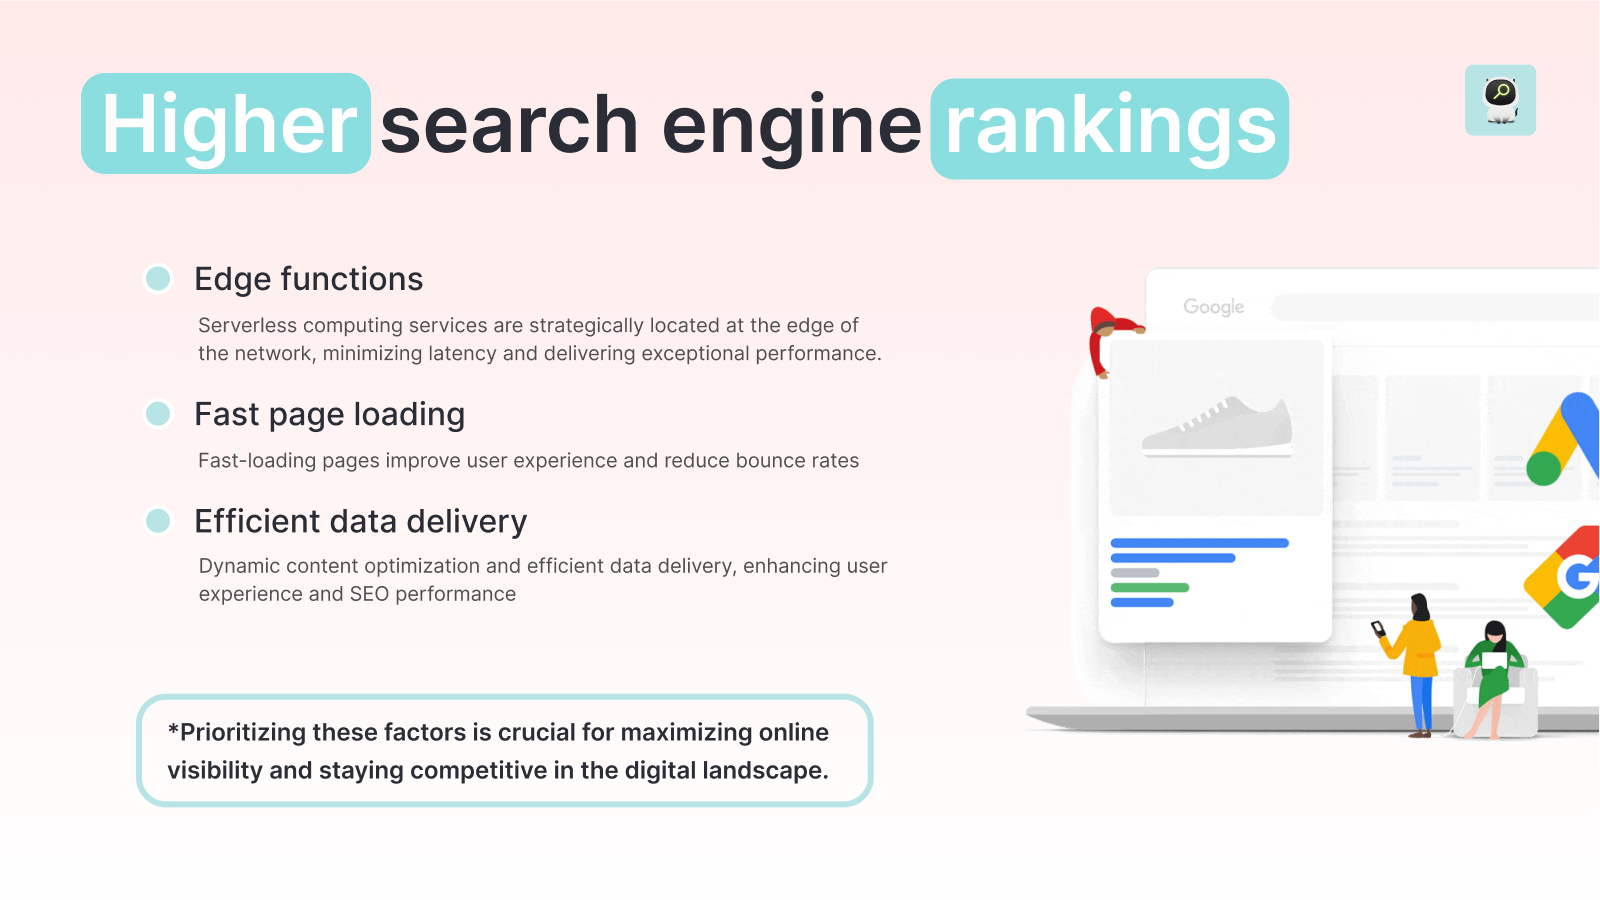 Higher search engine ranking